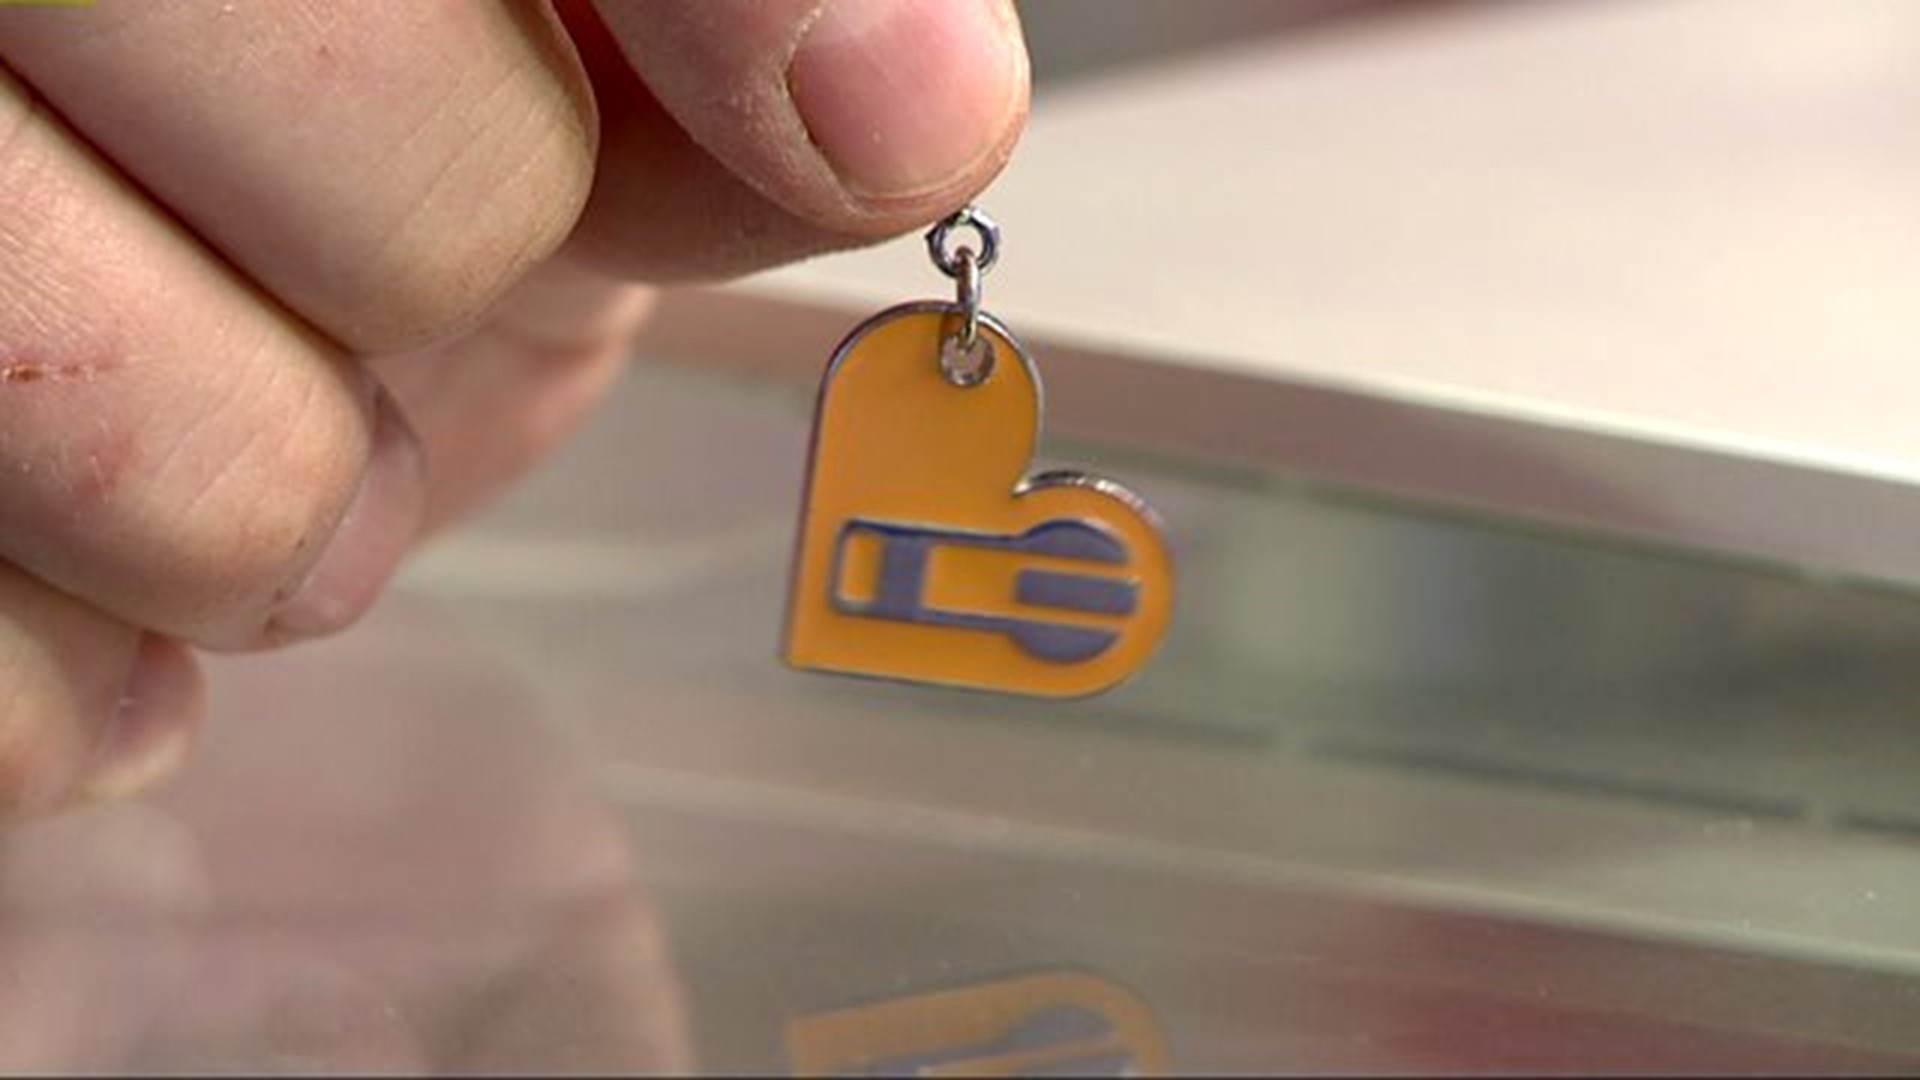 Zip up for special needs campaign with "Zipper Pull"